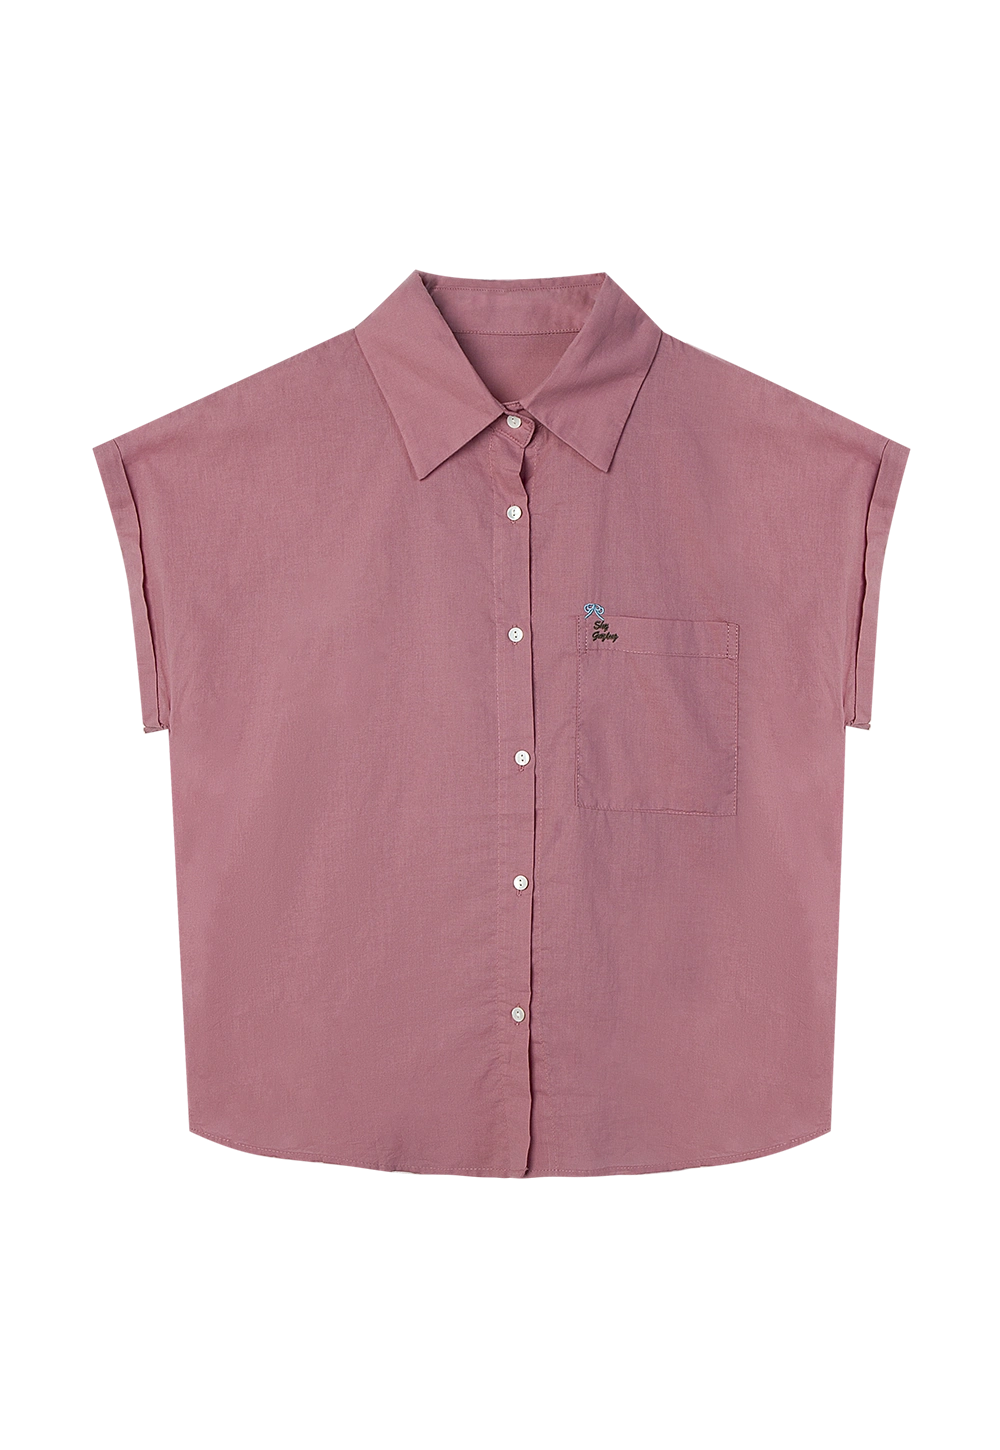 Women's Short Sleeve Cotton Button-Down Shirt in Dusty Rose with Embroidered Logo